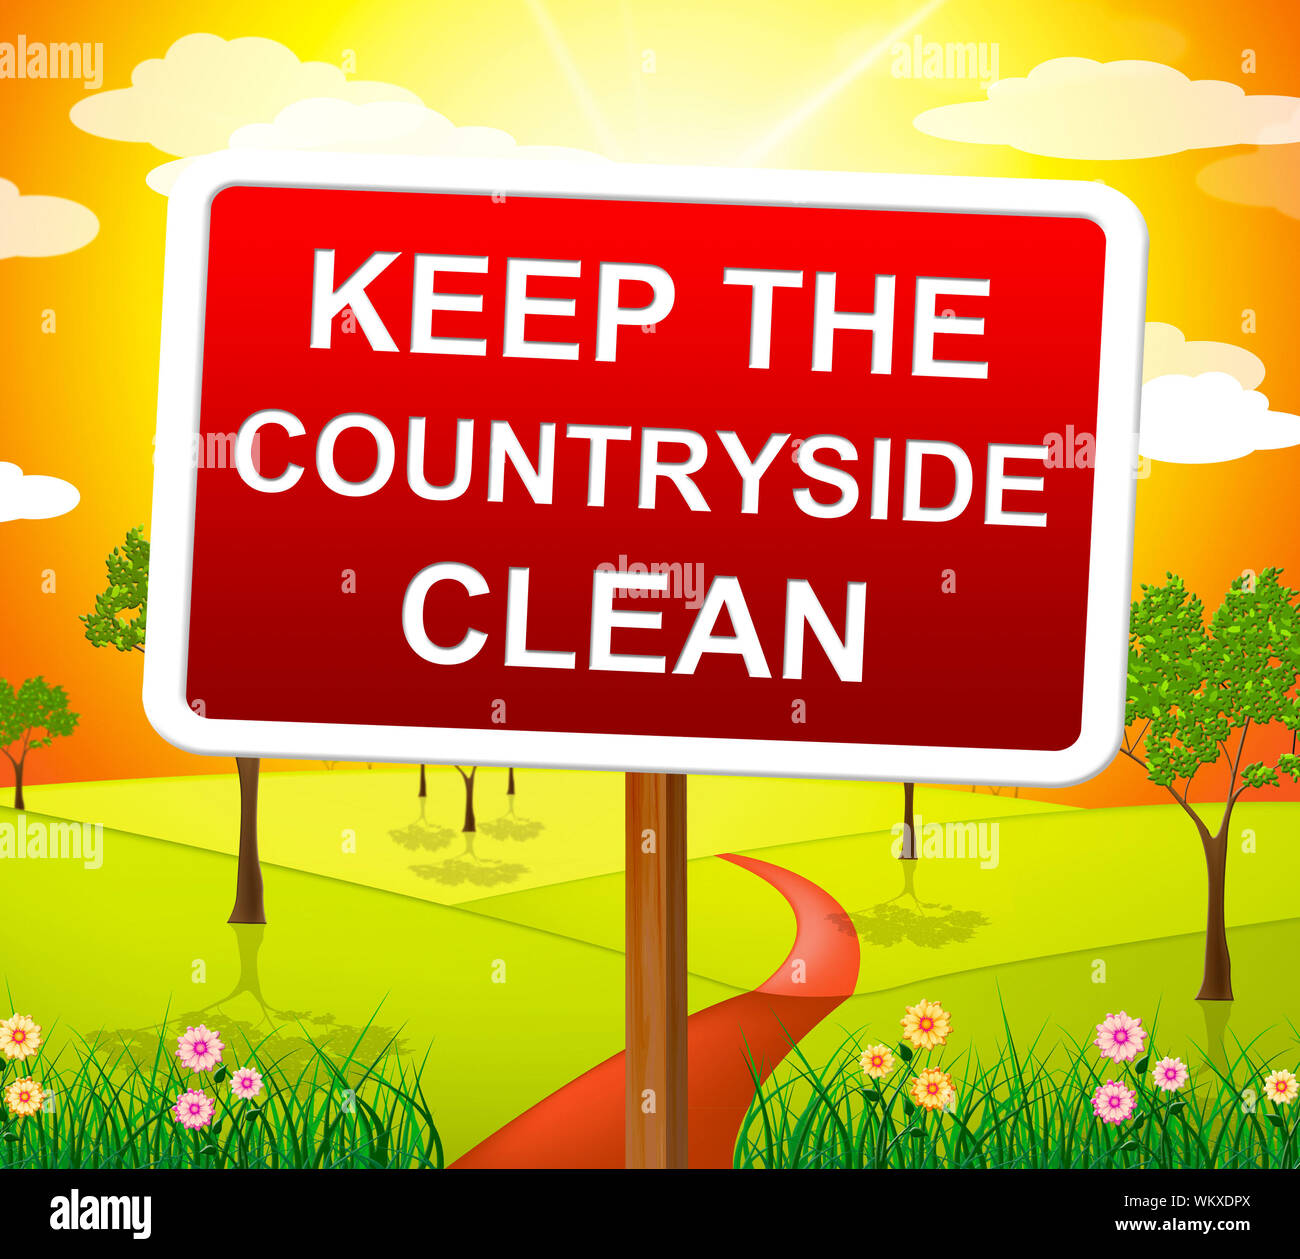 Keep Countryside Clean Showing Natural Landscape And Environment Stock Photo